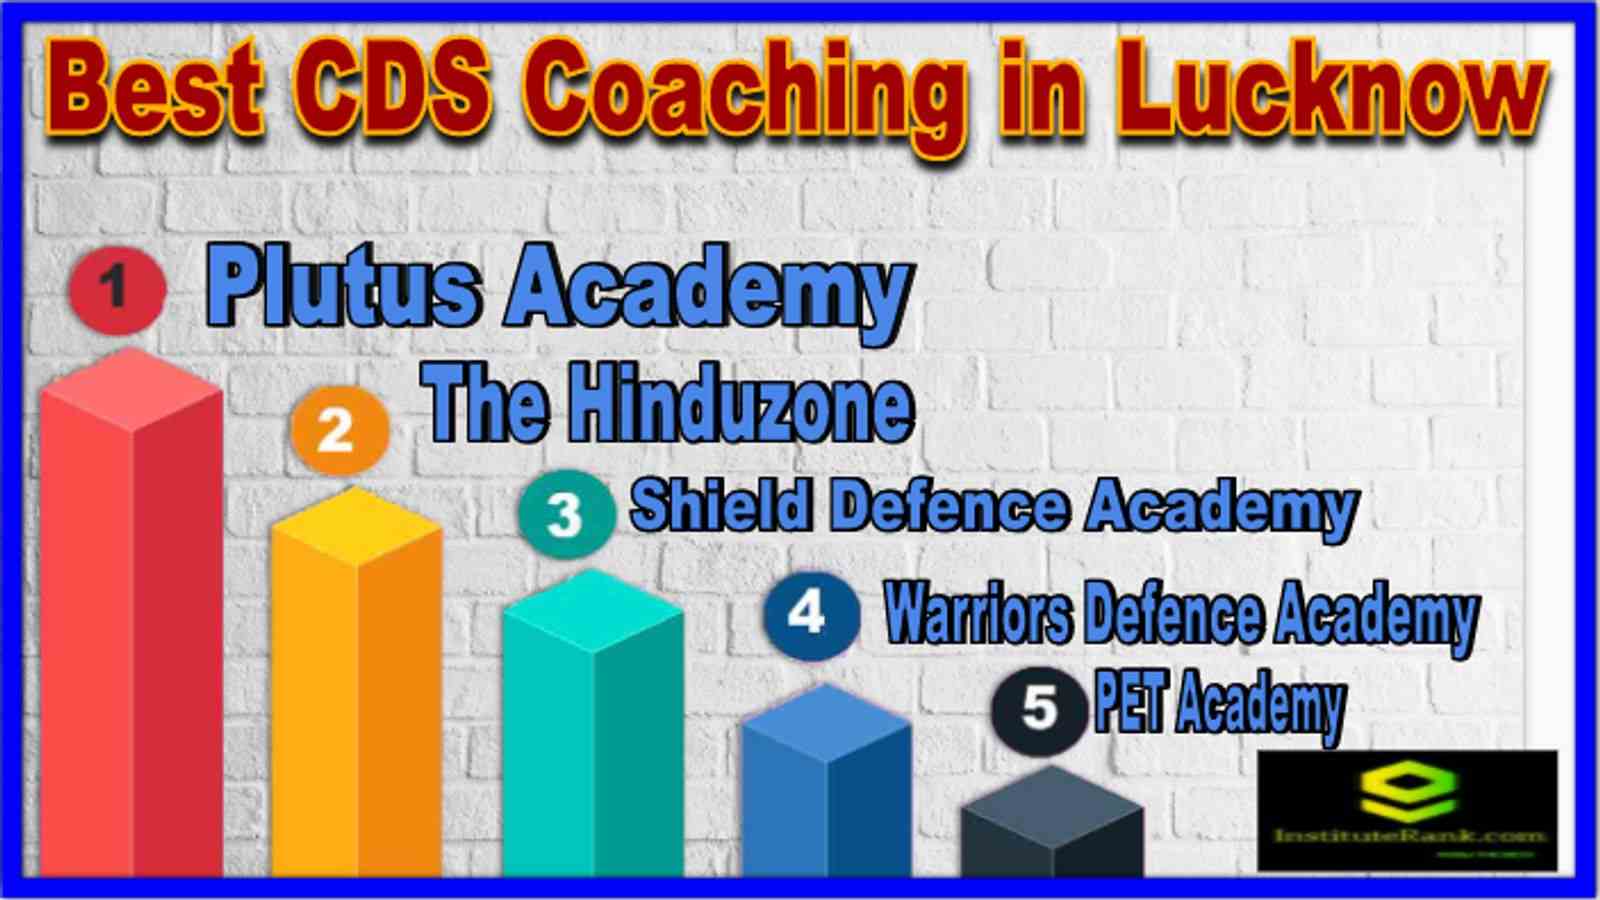 Top CDS Coaching in Lucknow